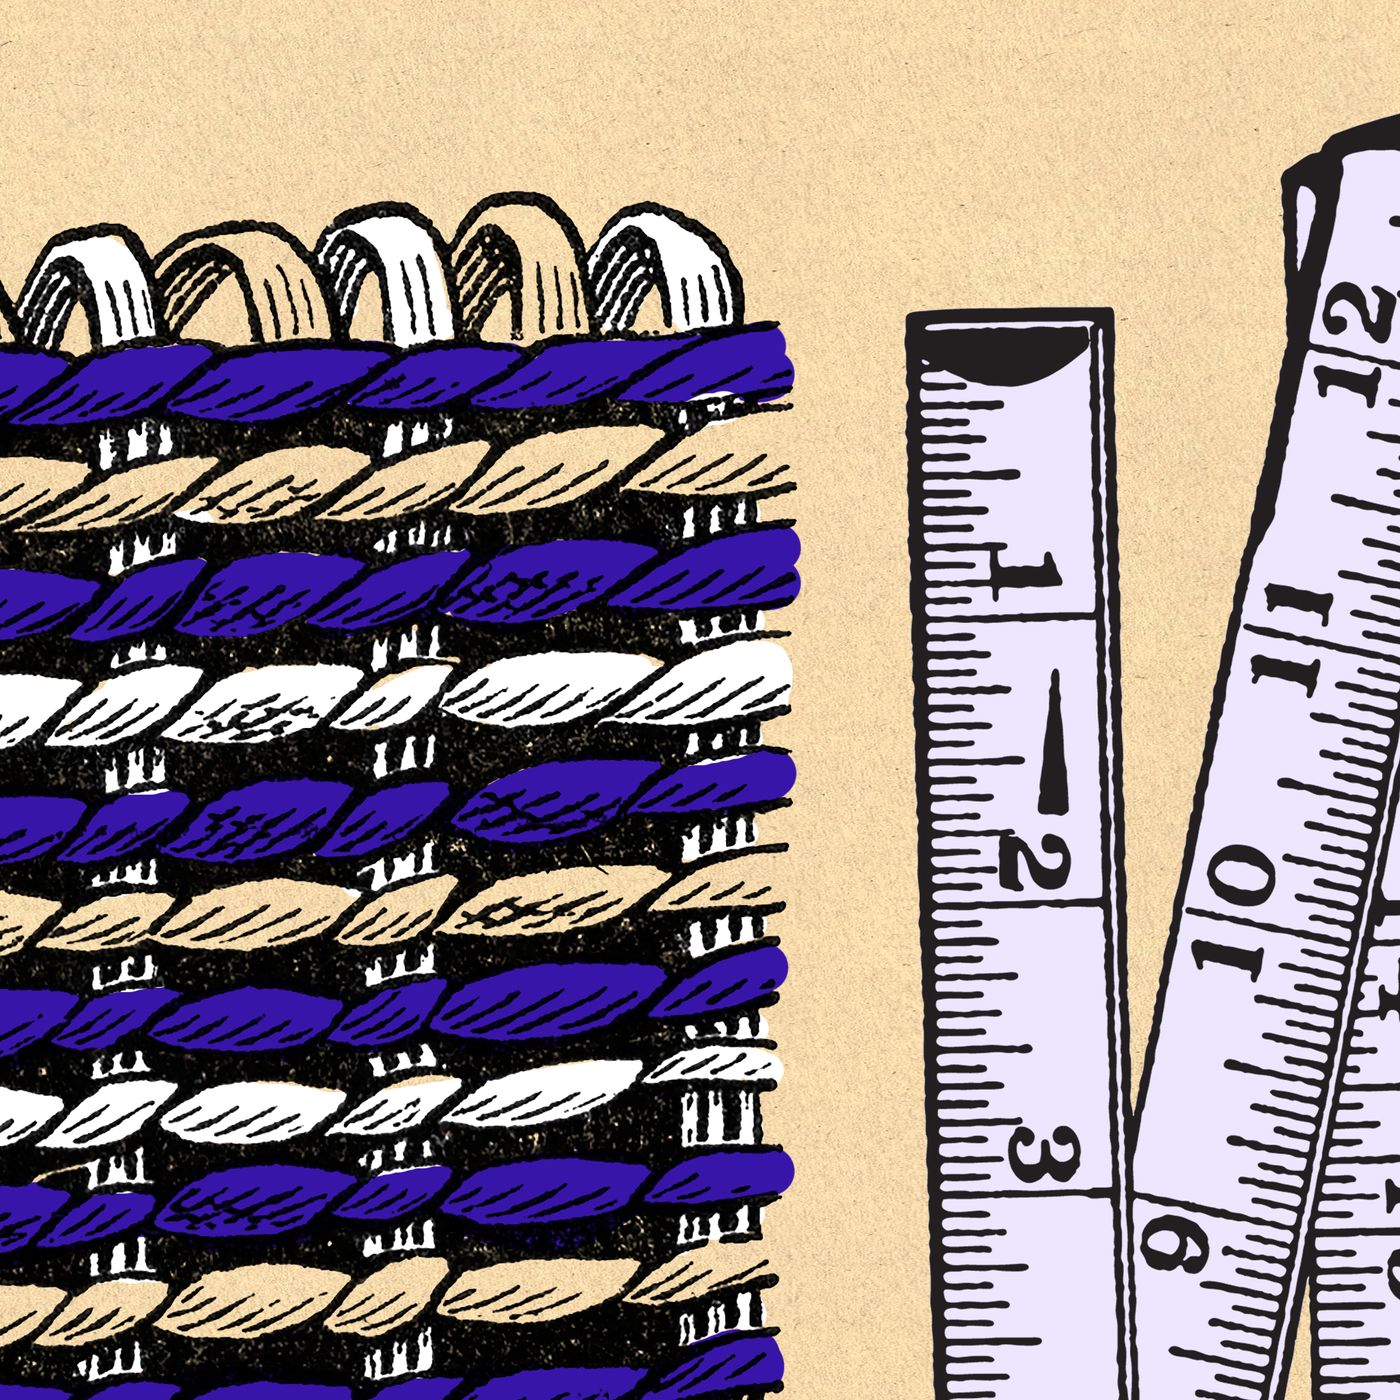 Does Thread Count Matter? Not Anymore The Facts on Thread Count